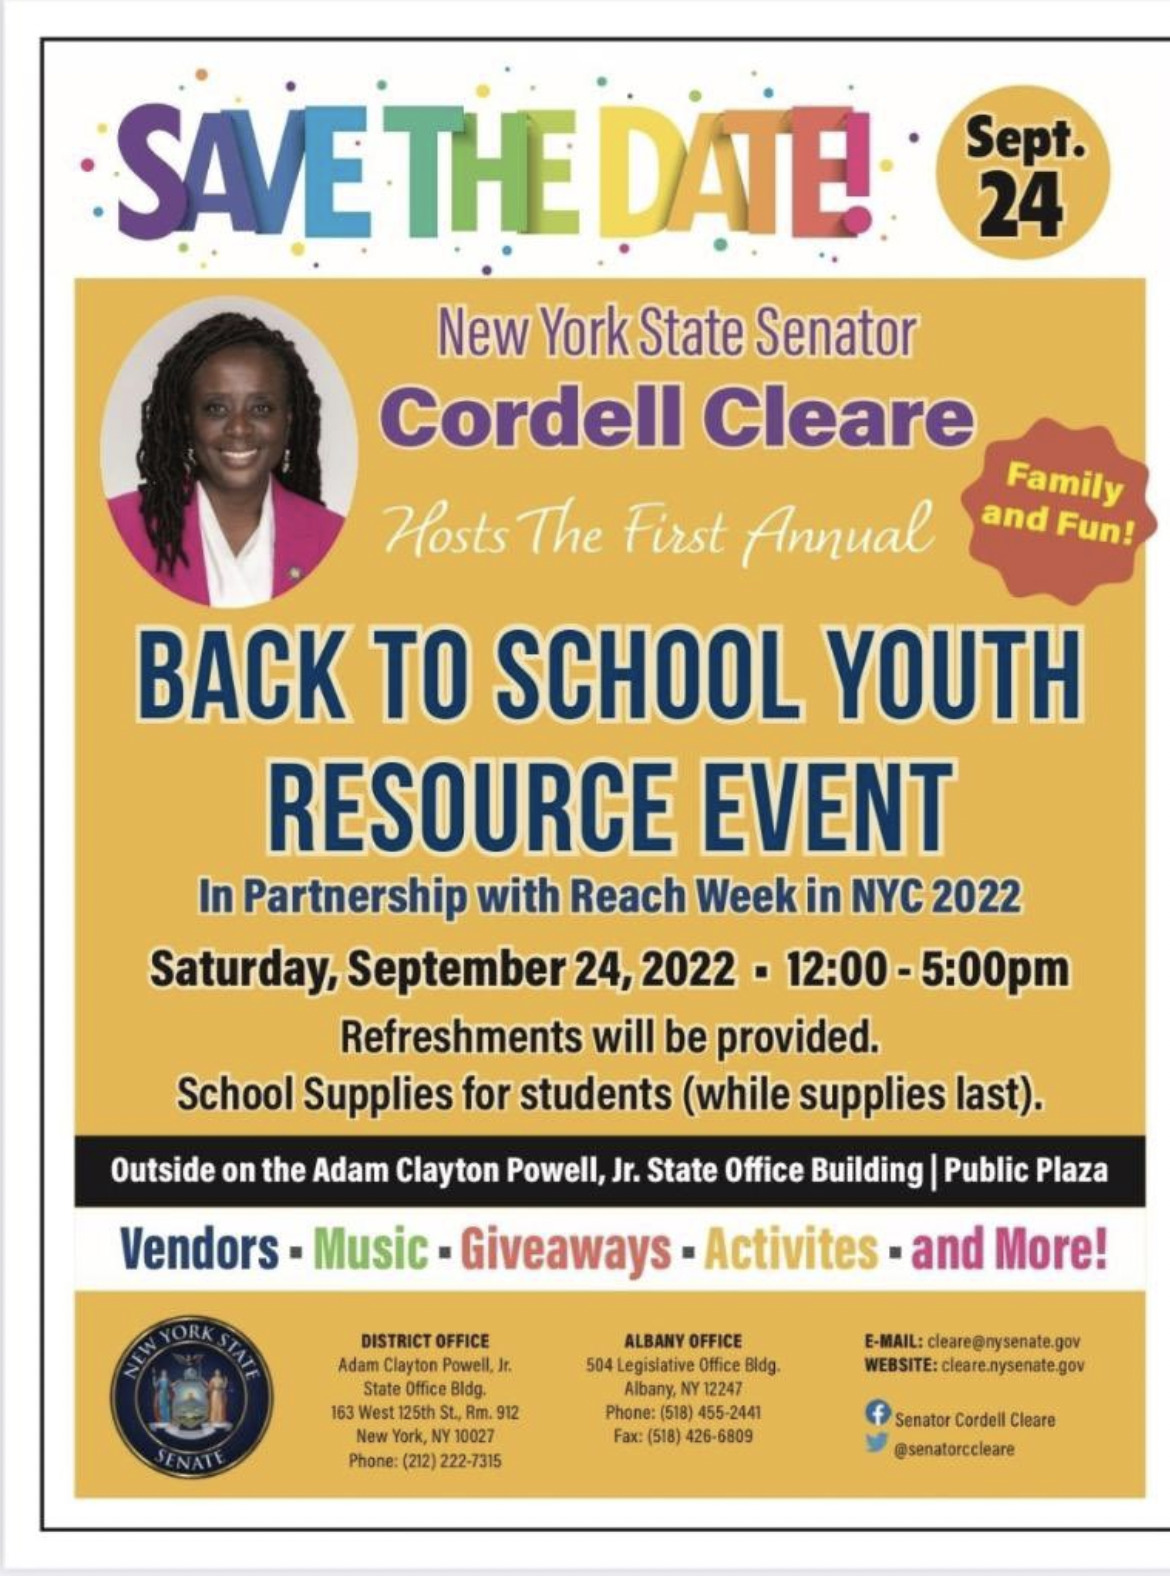 Back to School Youth Resource Event in Central Harlem